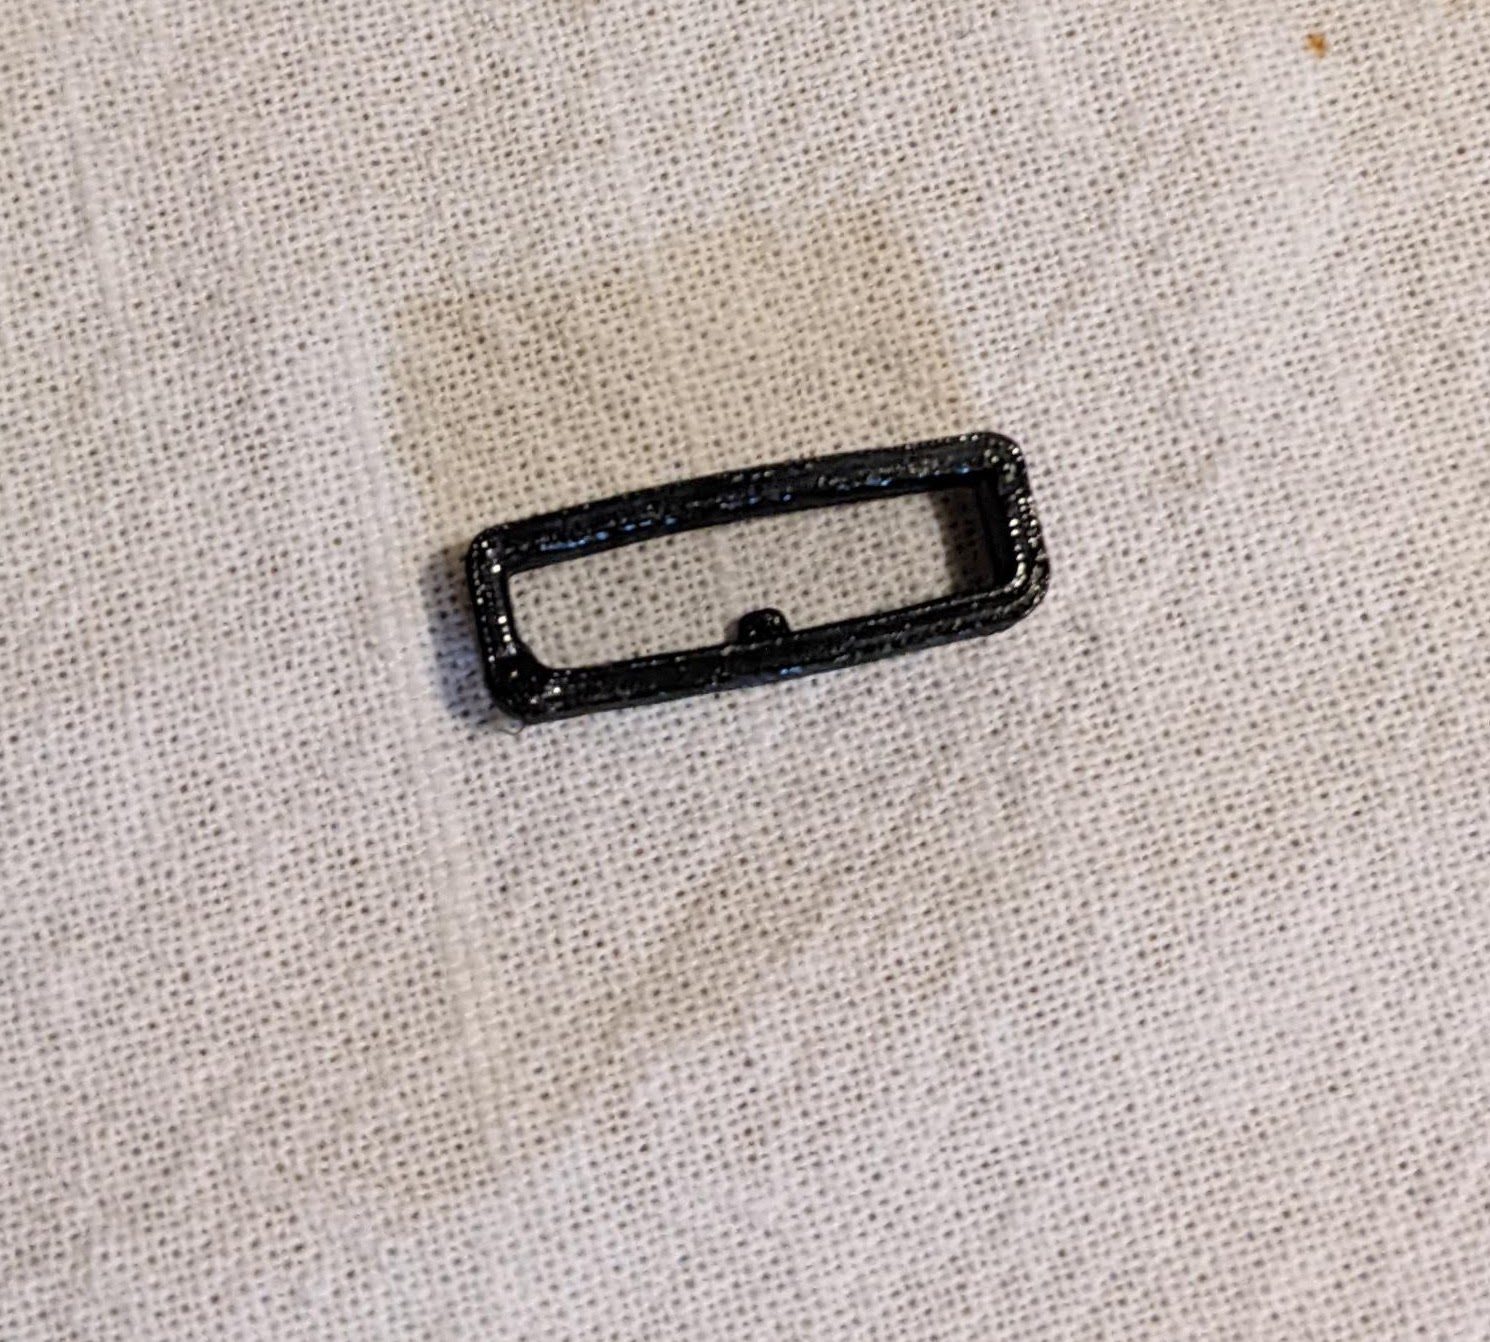 Fitbit retainer band